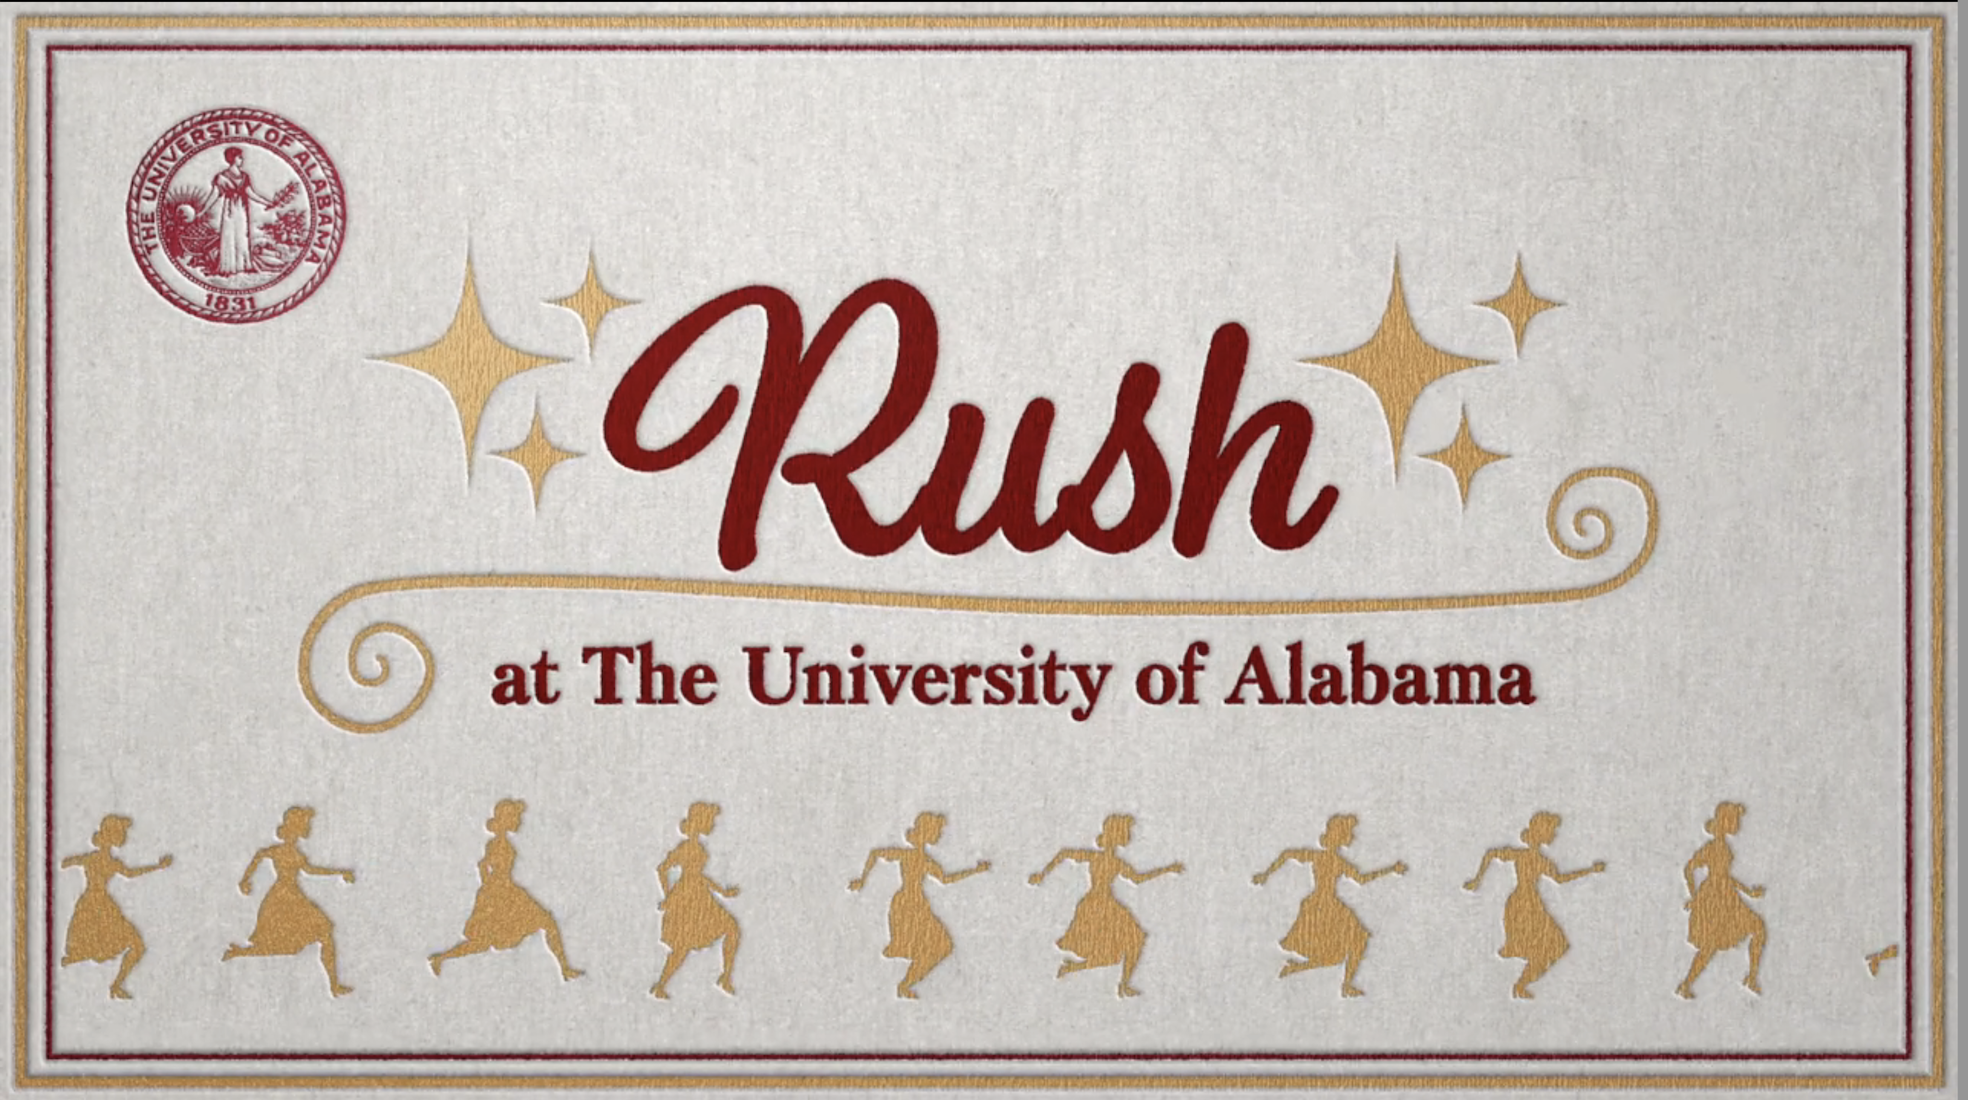 &quot;Rush at the The University of Alabama&quot;